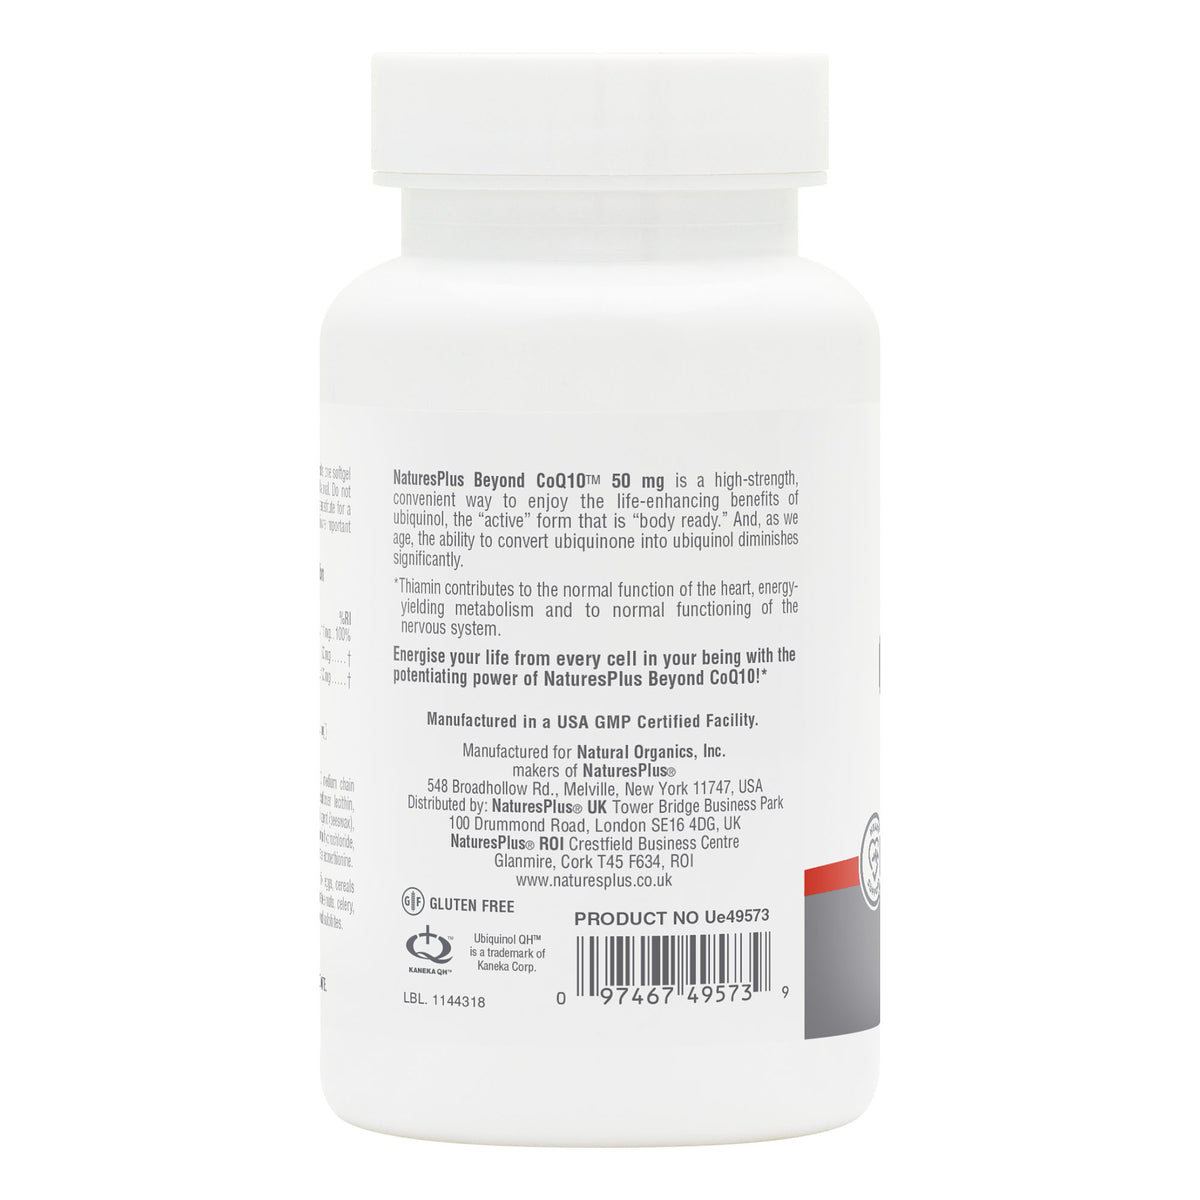 product image of Beyond CoQ10® 50 mg Softgels containing 60 Count